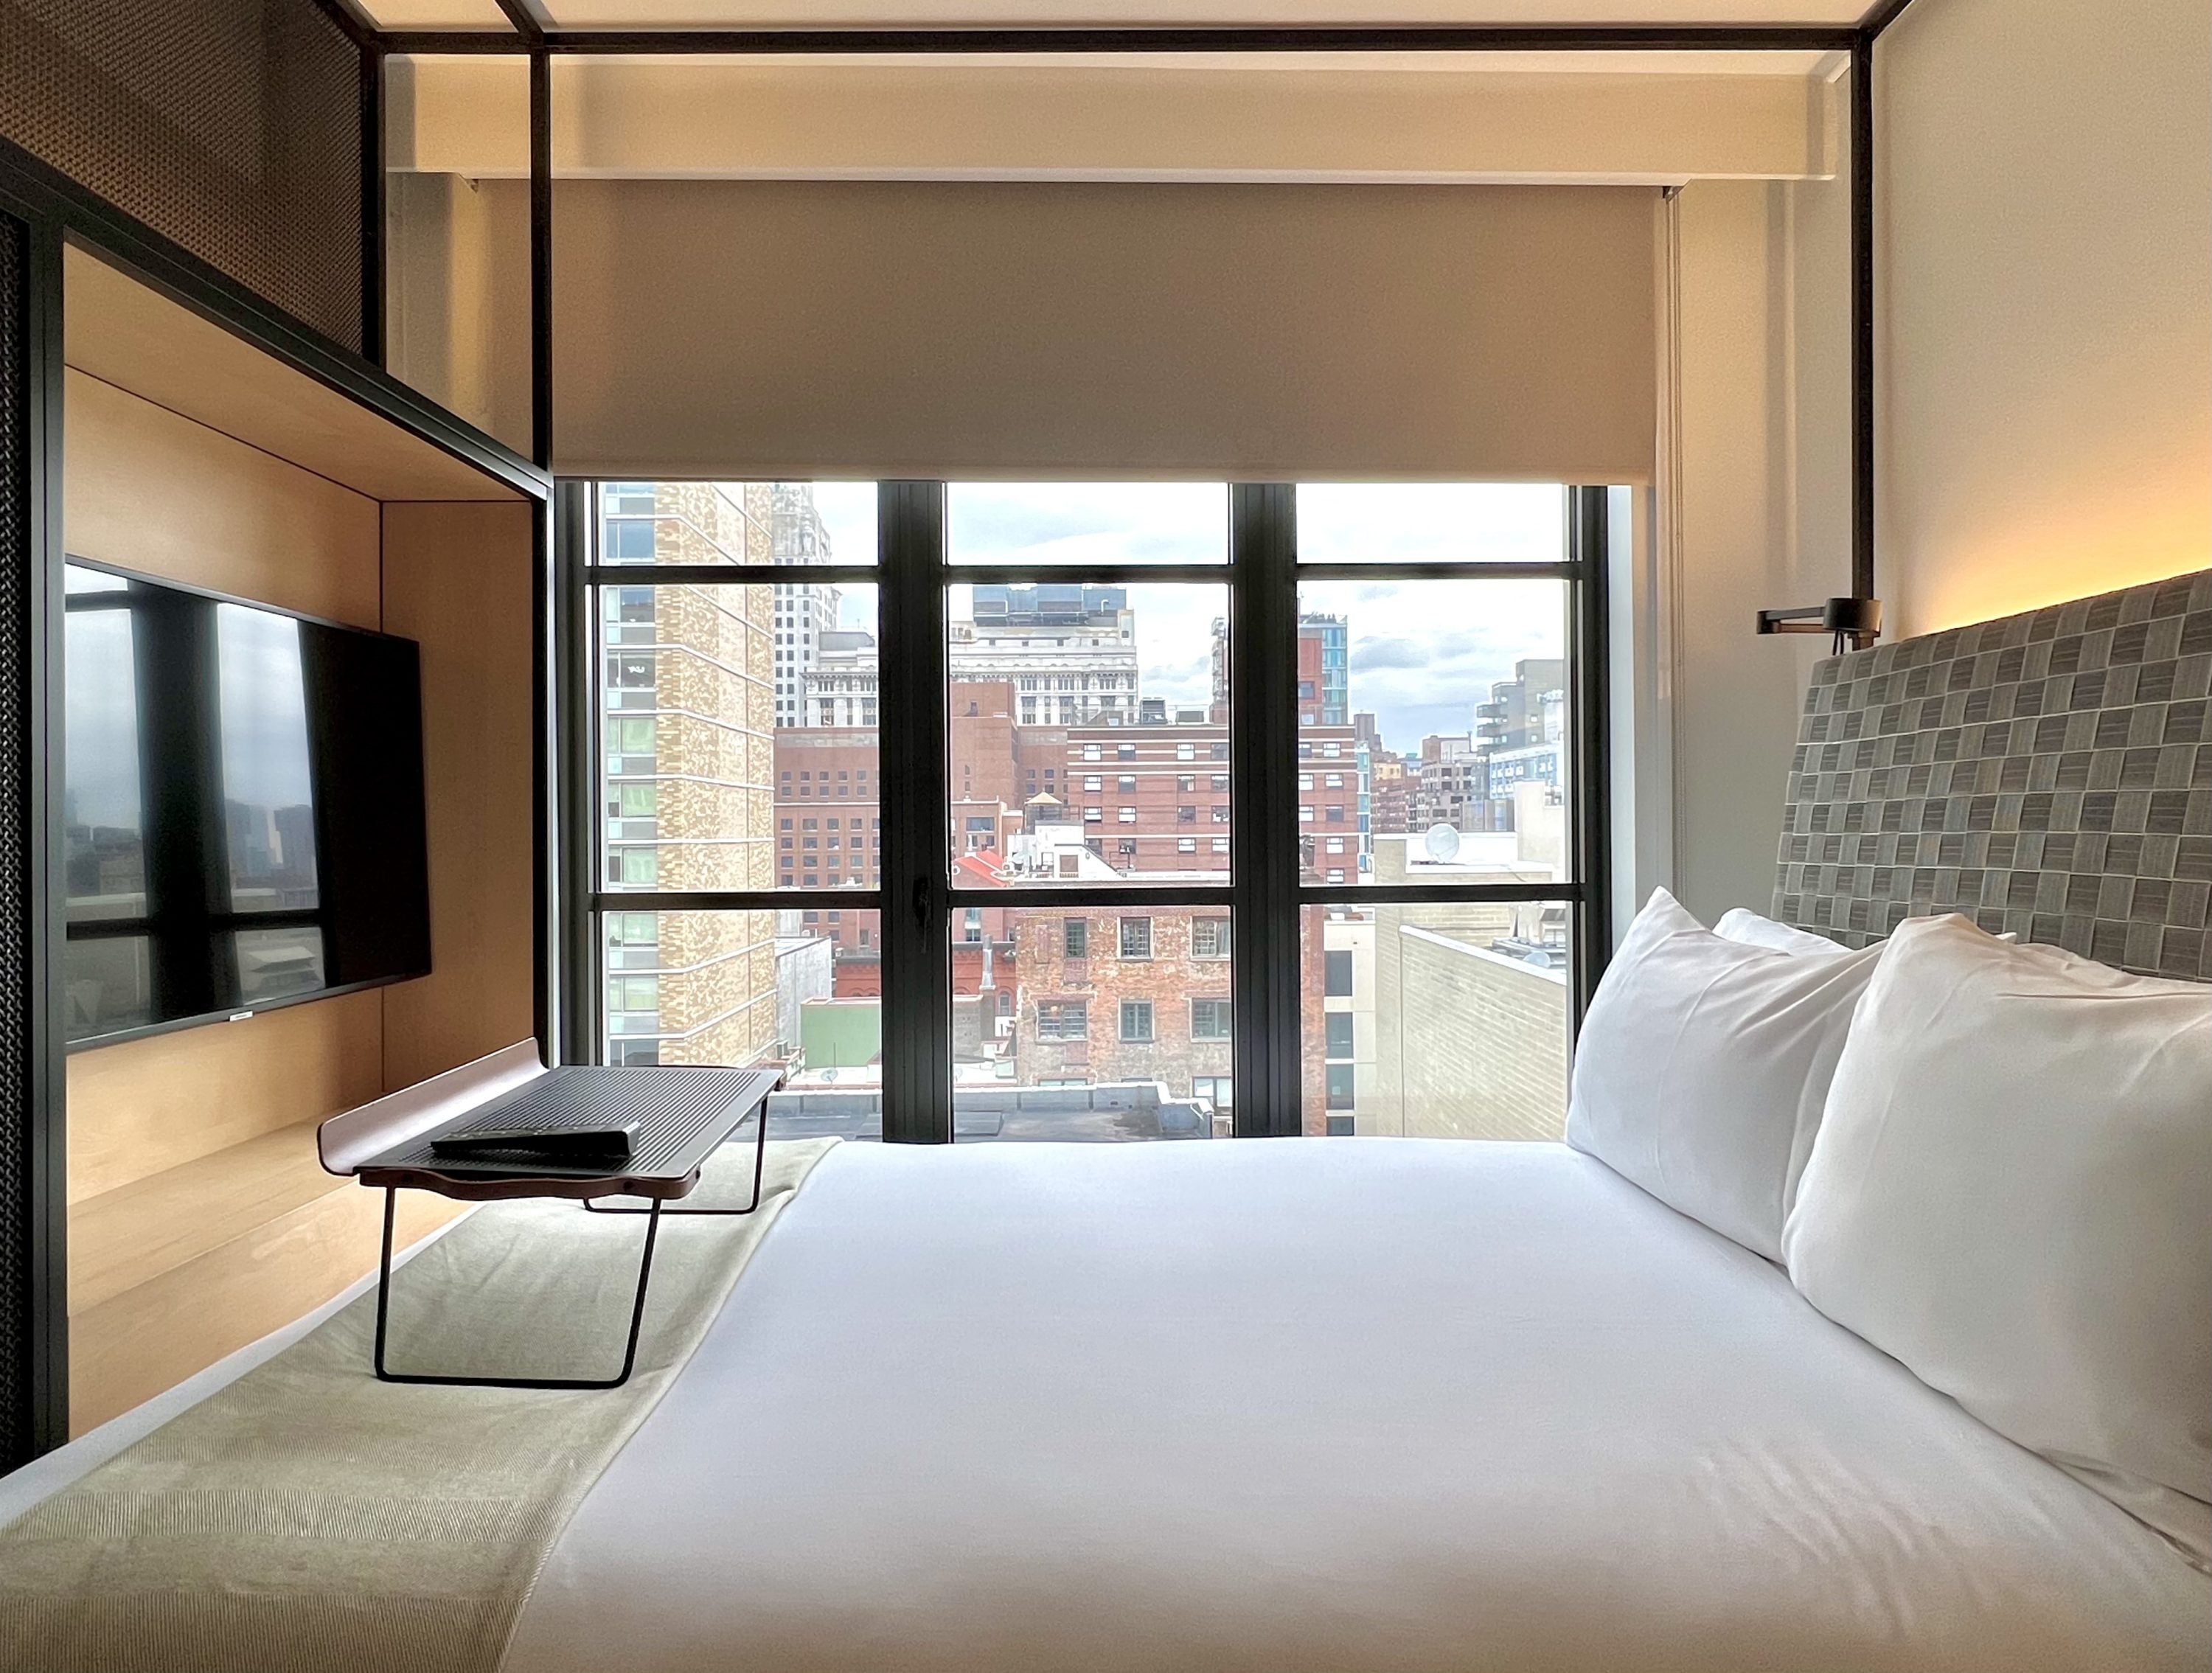 Moxy East Village bedroom bed view by day